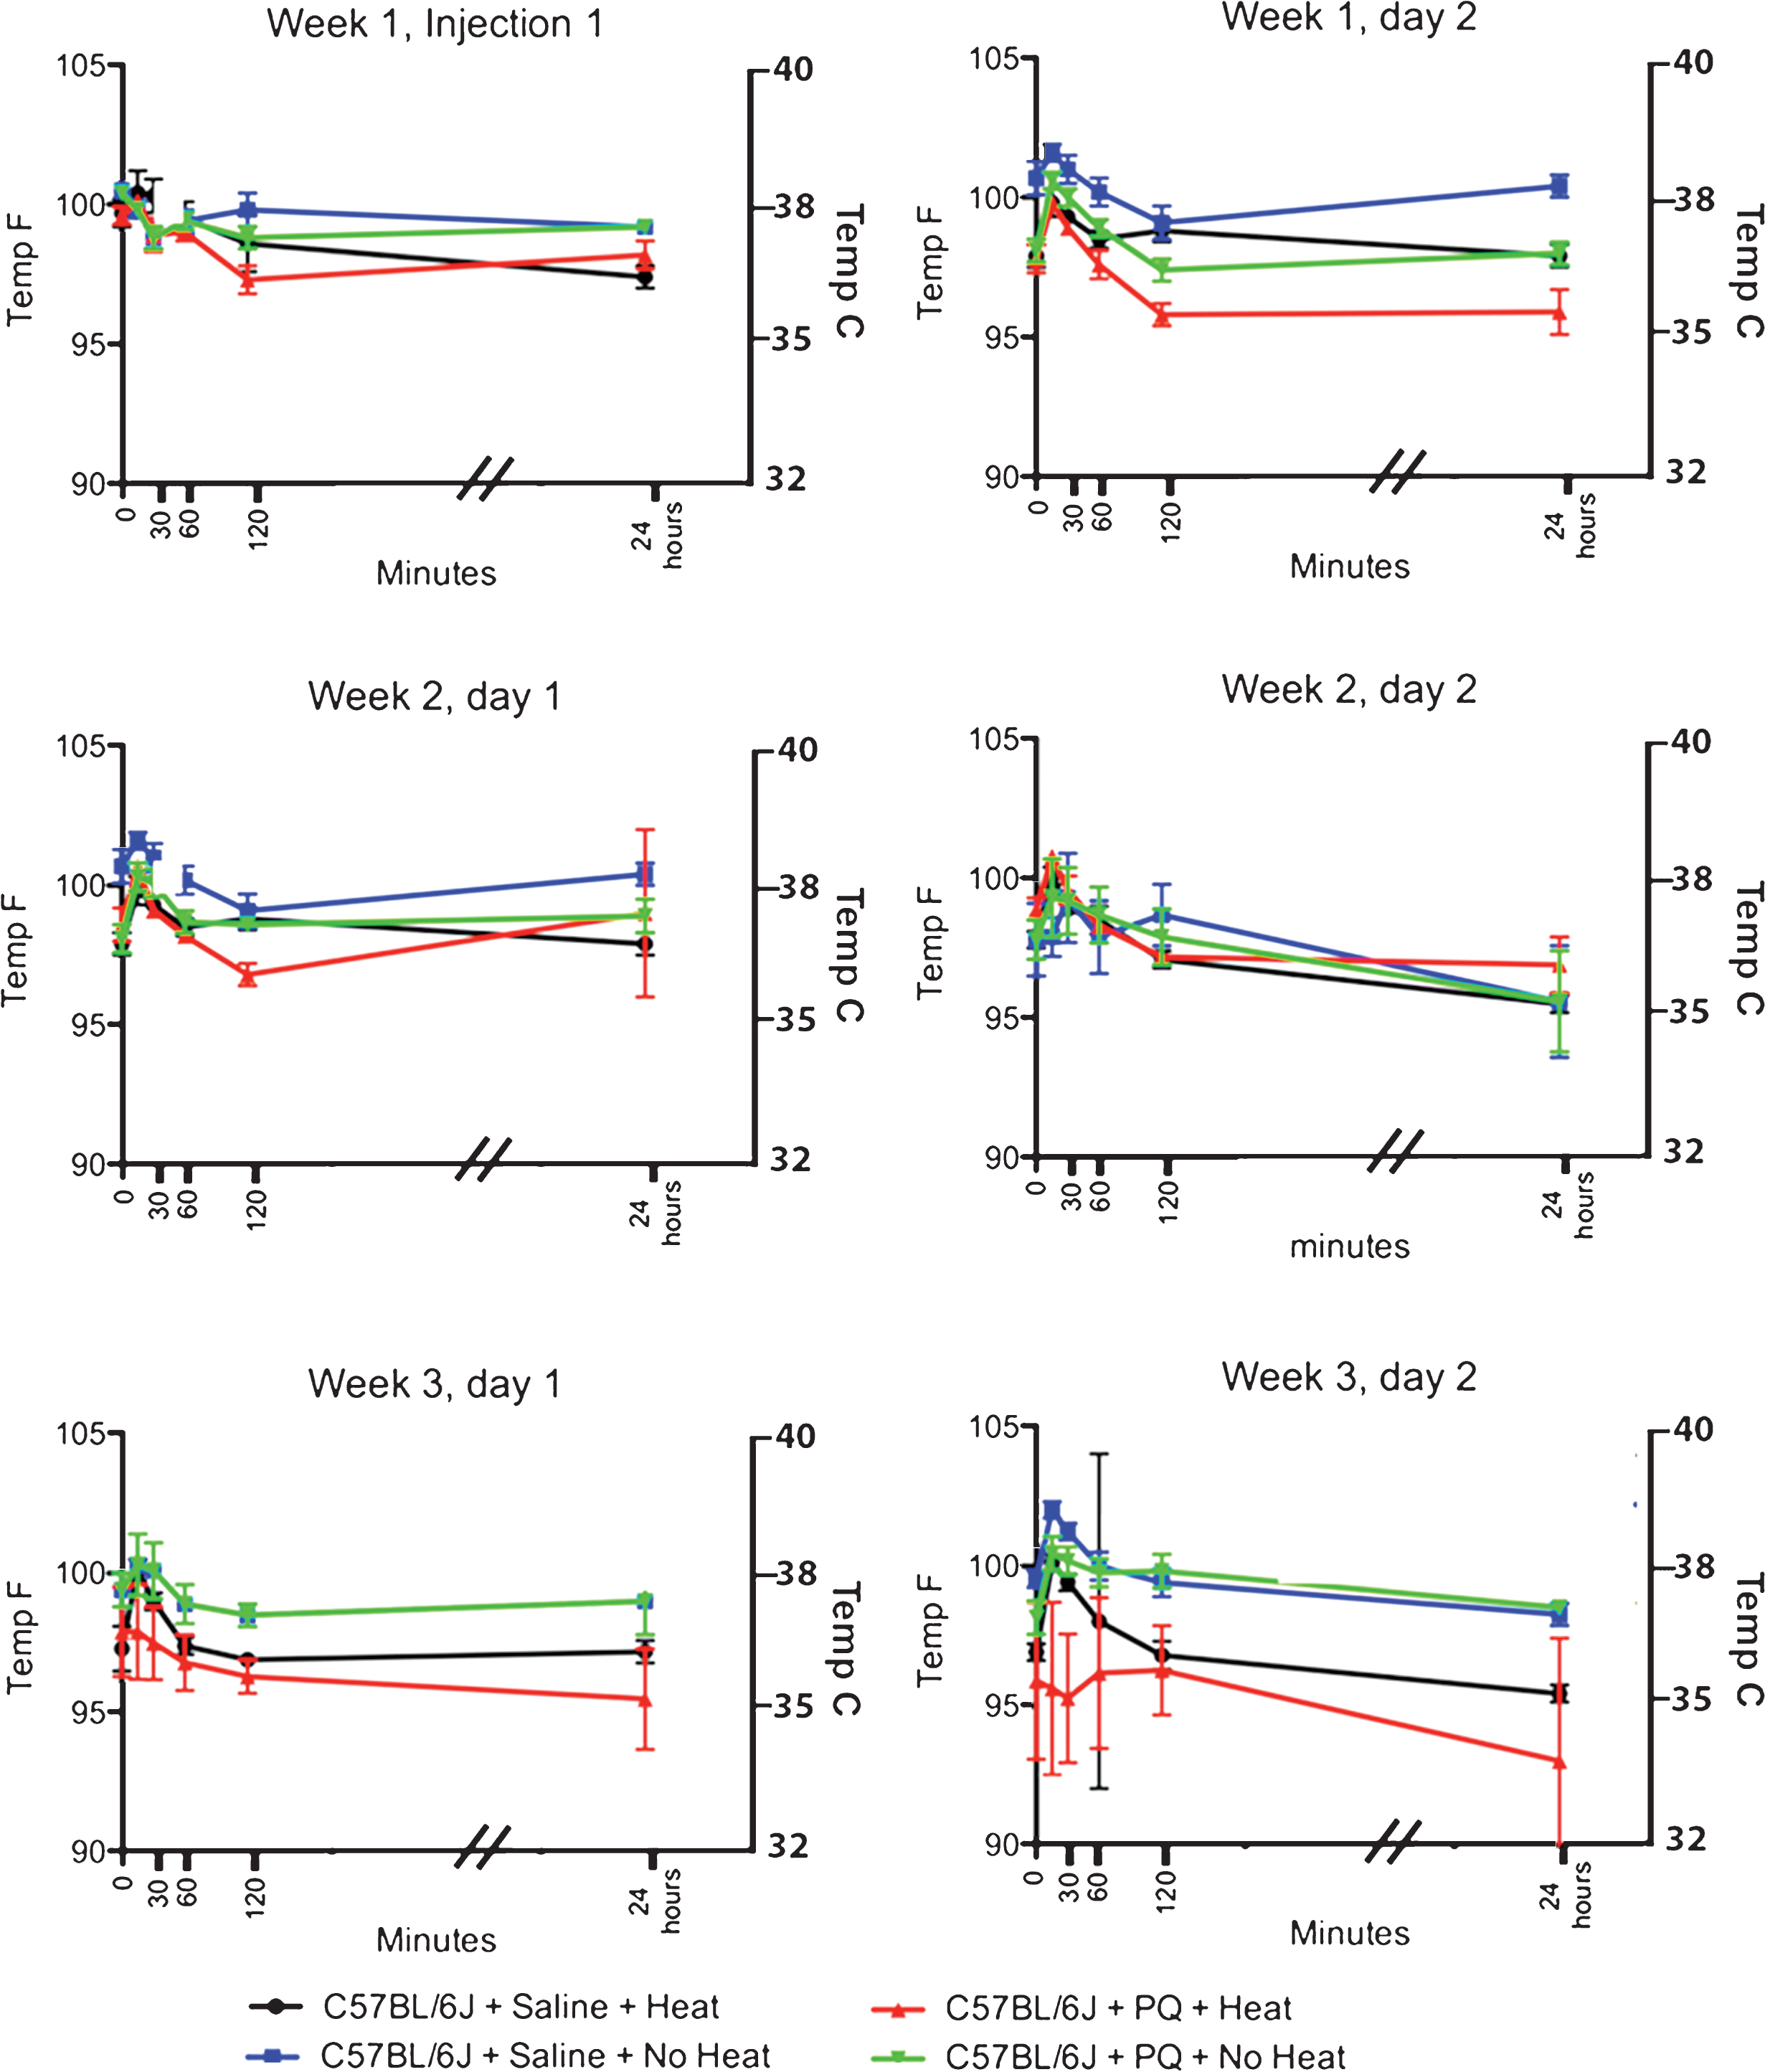 Effect of Paraquat on Core Temperature in C57BL/6J mice. Paraquat (2 injections of 10 mg/kg PQ/week spaced 48 hours apart for 3 weeks) administered to C57BL/6J mice has no significant effect on the core temperature of mice throughout the entire injection period. One does note, however, a slight hyperthermia that is observed 15 minutes after administration of paraquat (increase of 3%) starting after the 2nd paraquat injection that recedes within 30 minutes of administration.